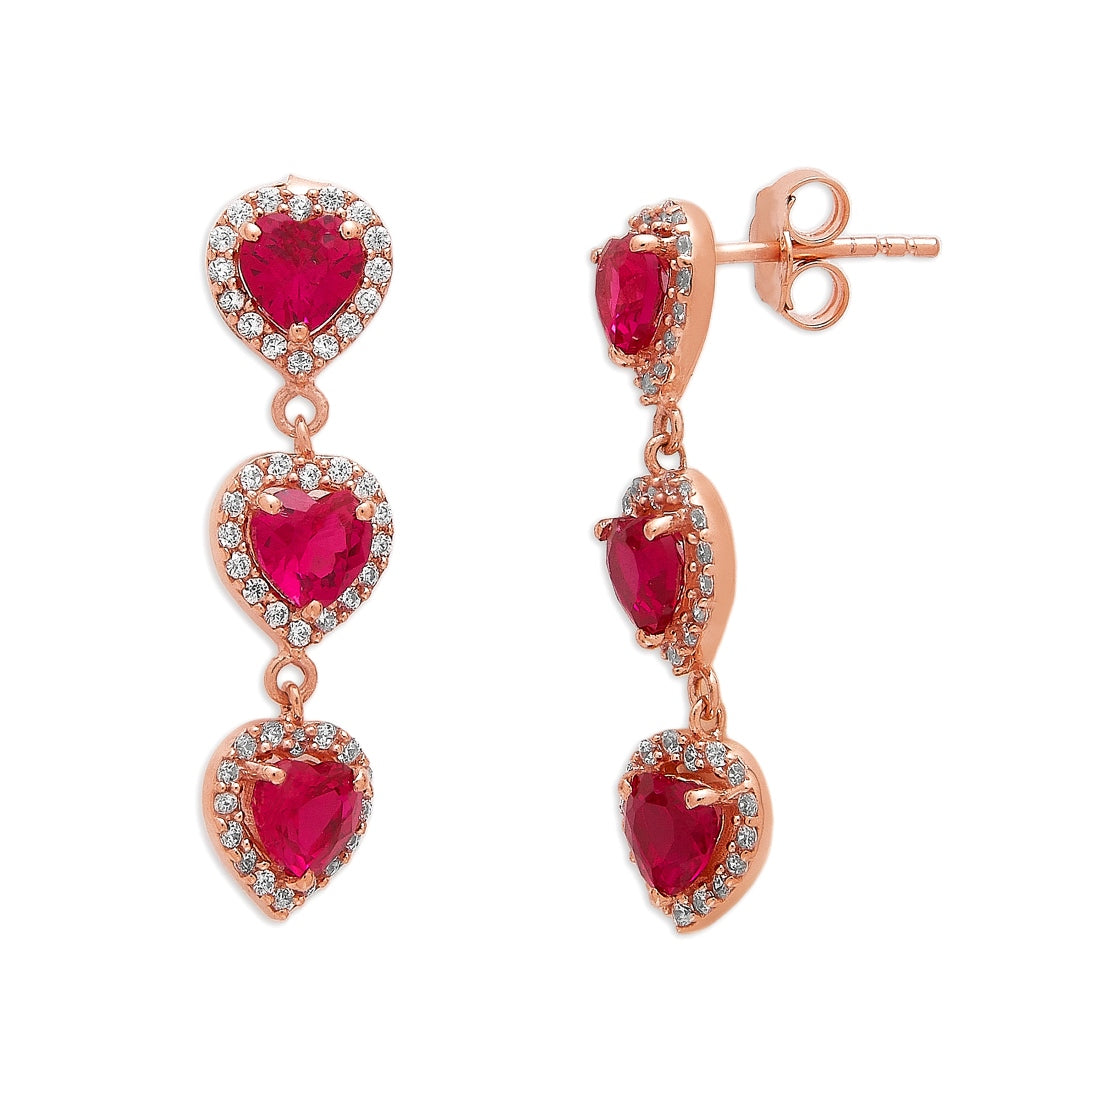 Rosy Love 925 Sterling Silver Heart Earrings with Cubic Zirconia